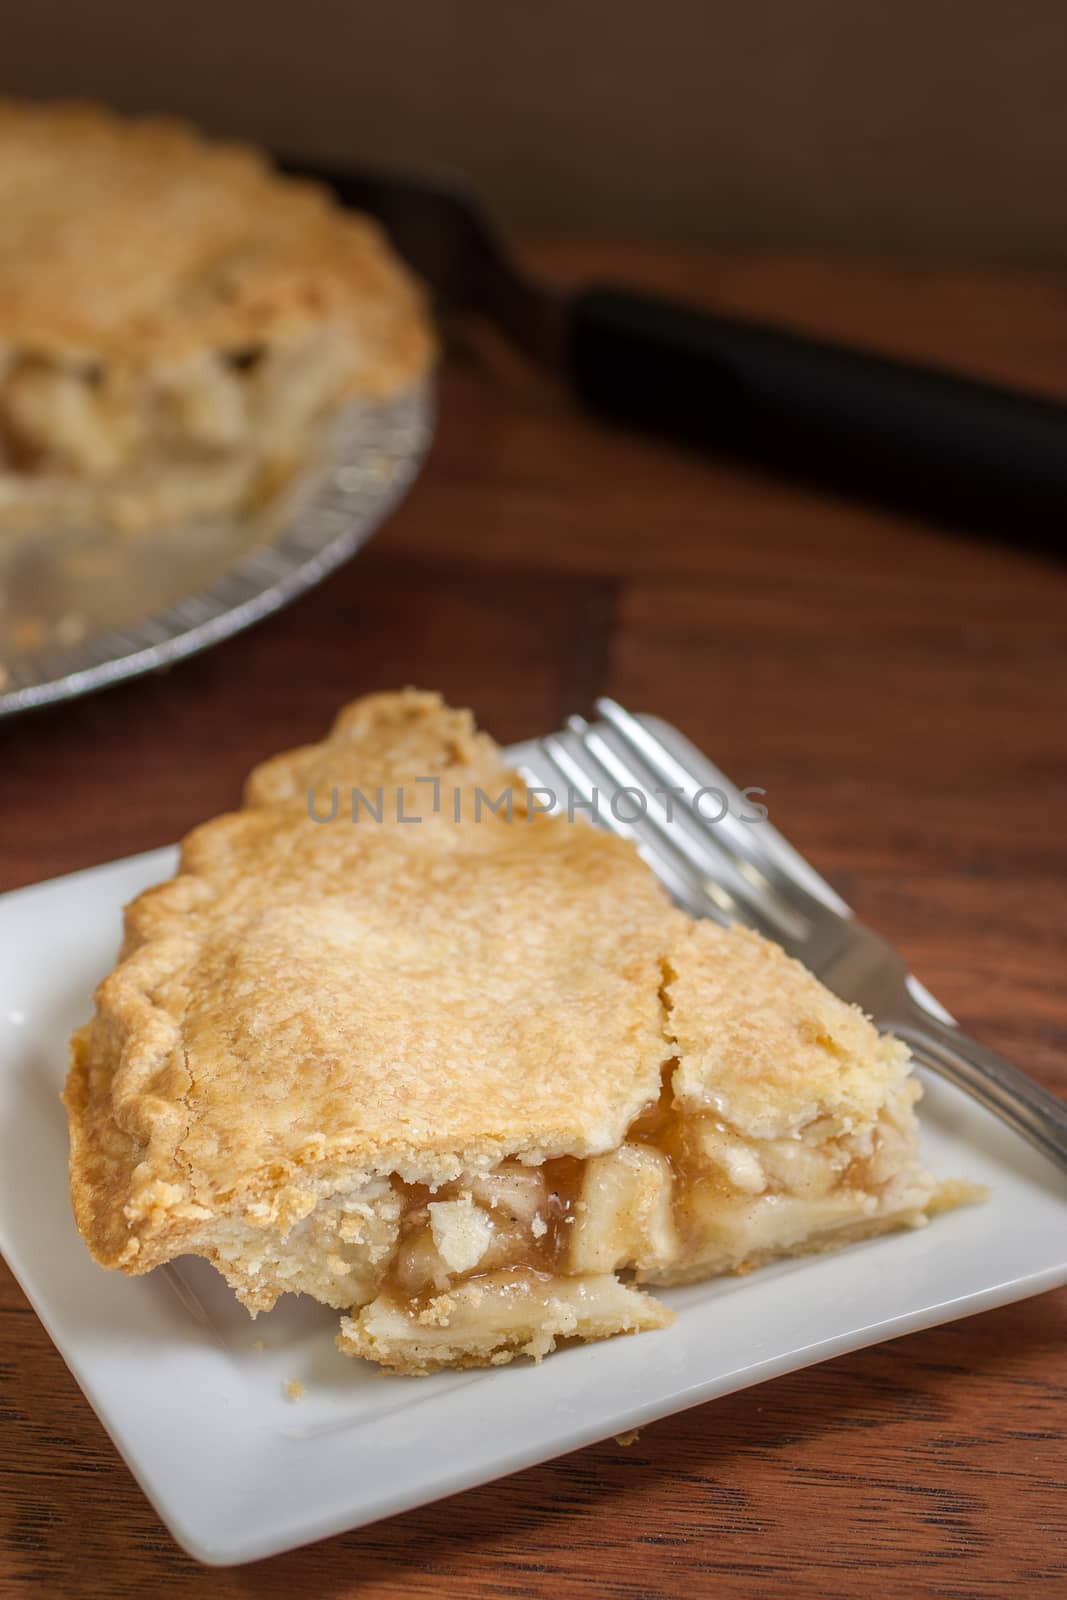 A rustic, handmade apple pie ready to searve.